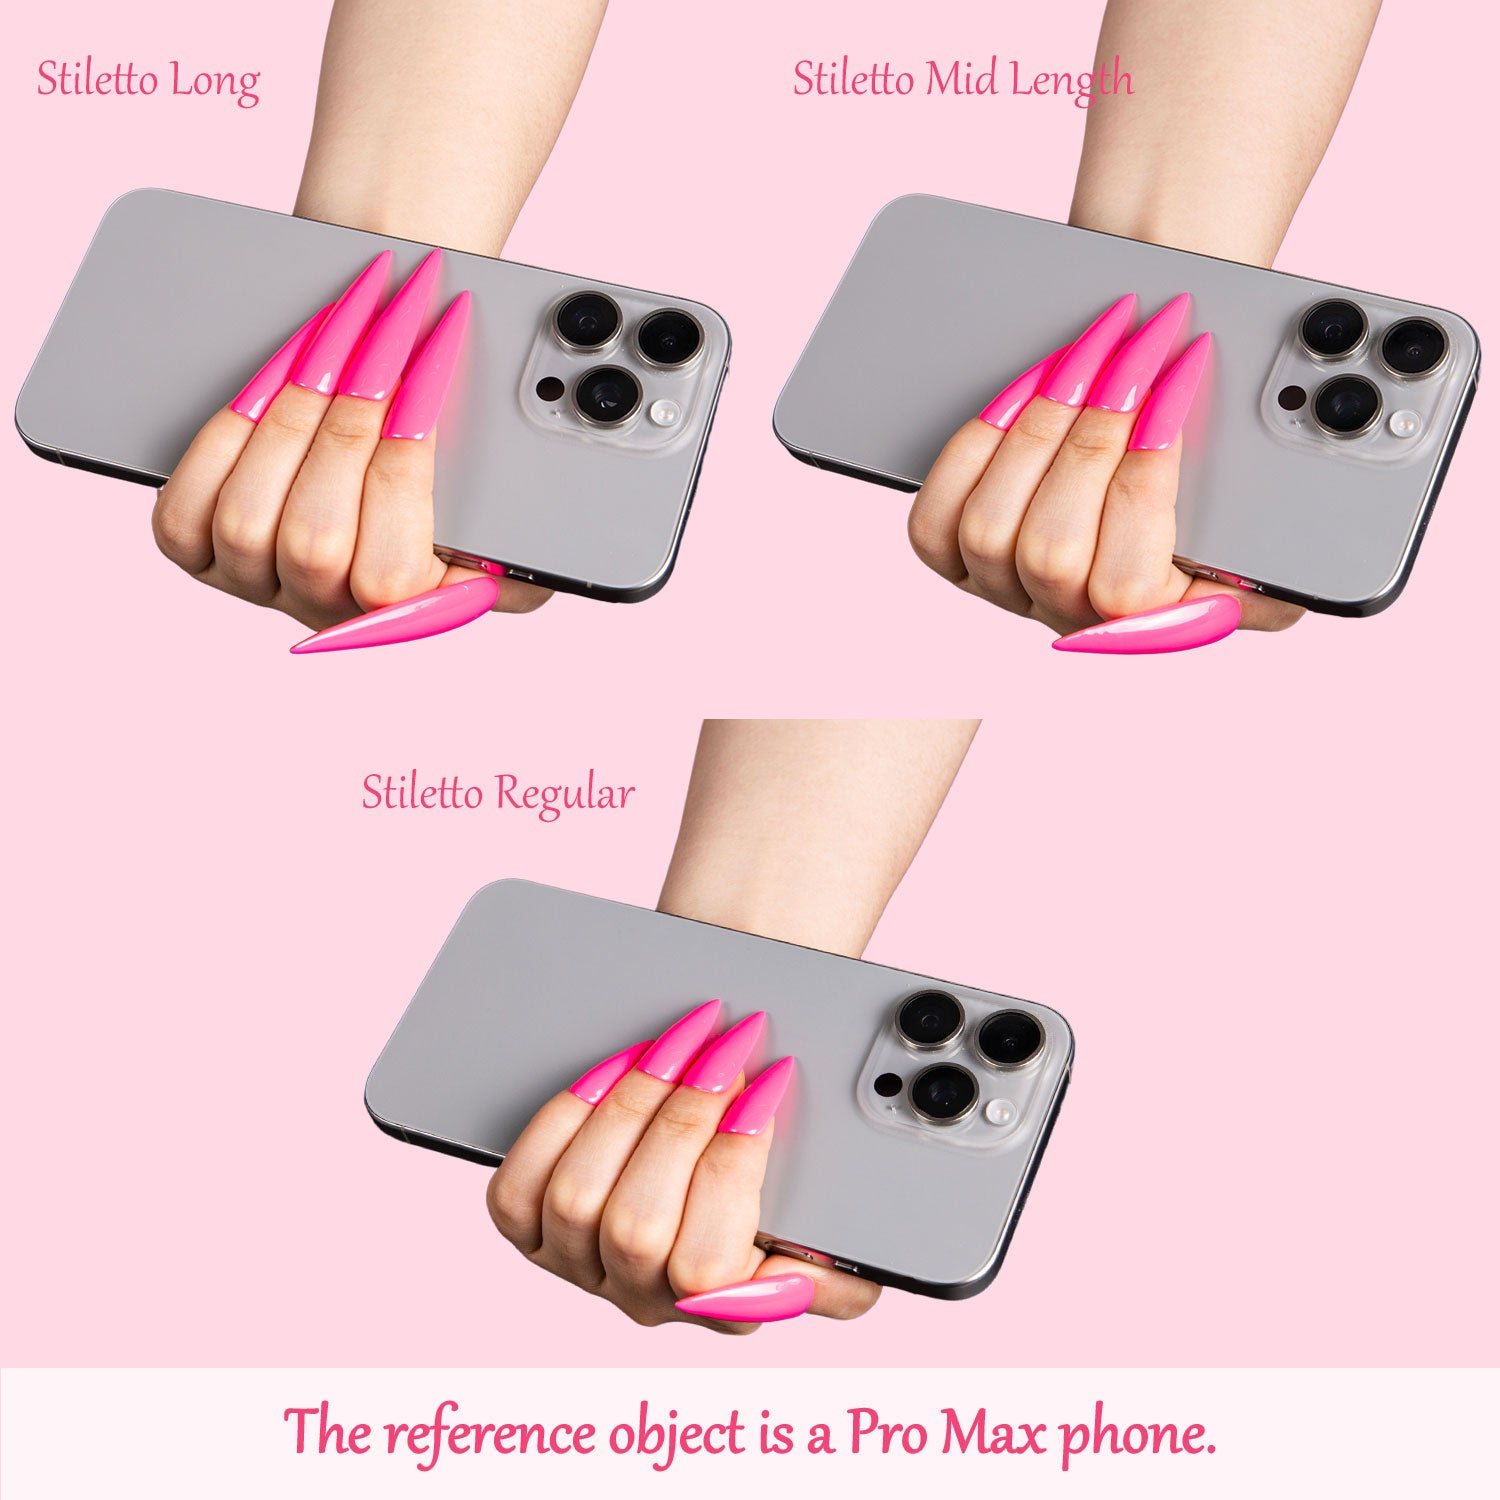 Comparison of pink stiletto press on nails in long, mid length, and regular sizes, each holding a Pro Max phone for reference.